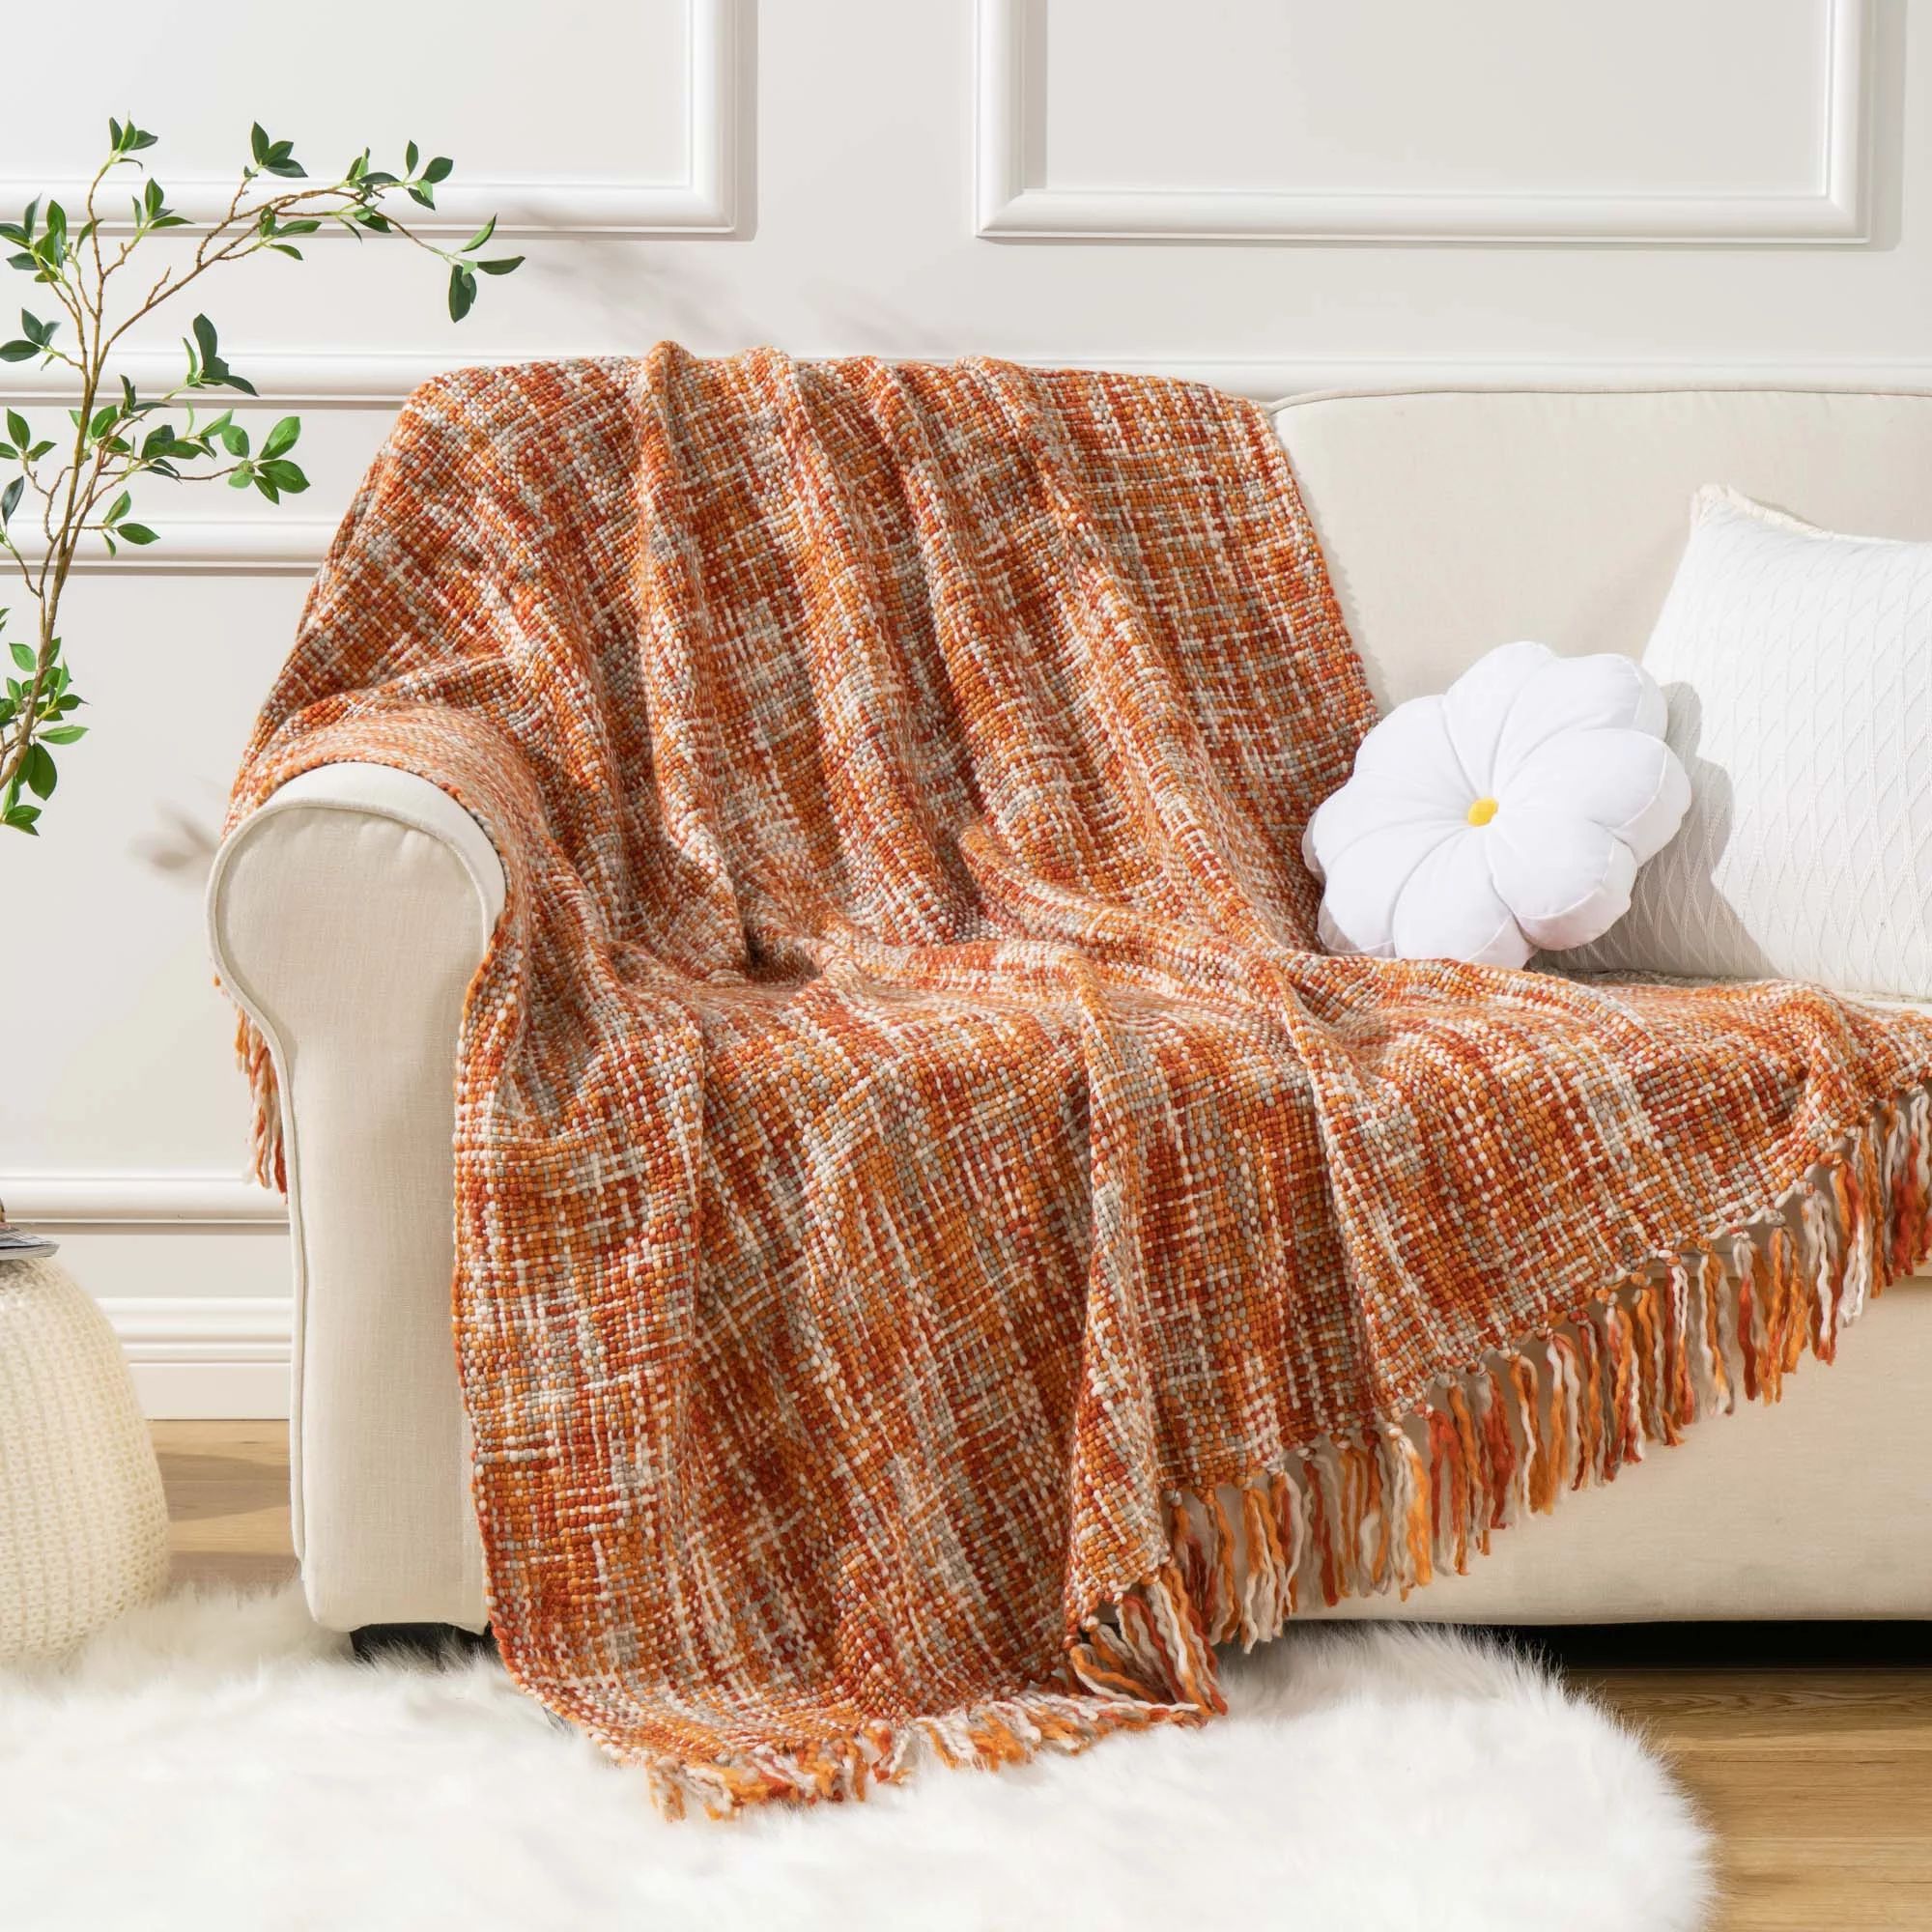 Battilo Rust Orange Throw Blanket for Couch, Decorative Fall Knit Blankets and Throws, Bed Throws... | Walmart (US)